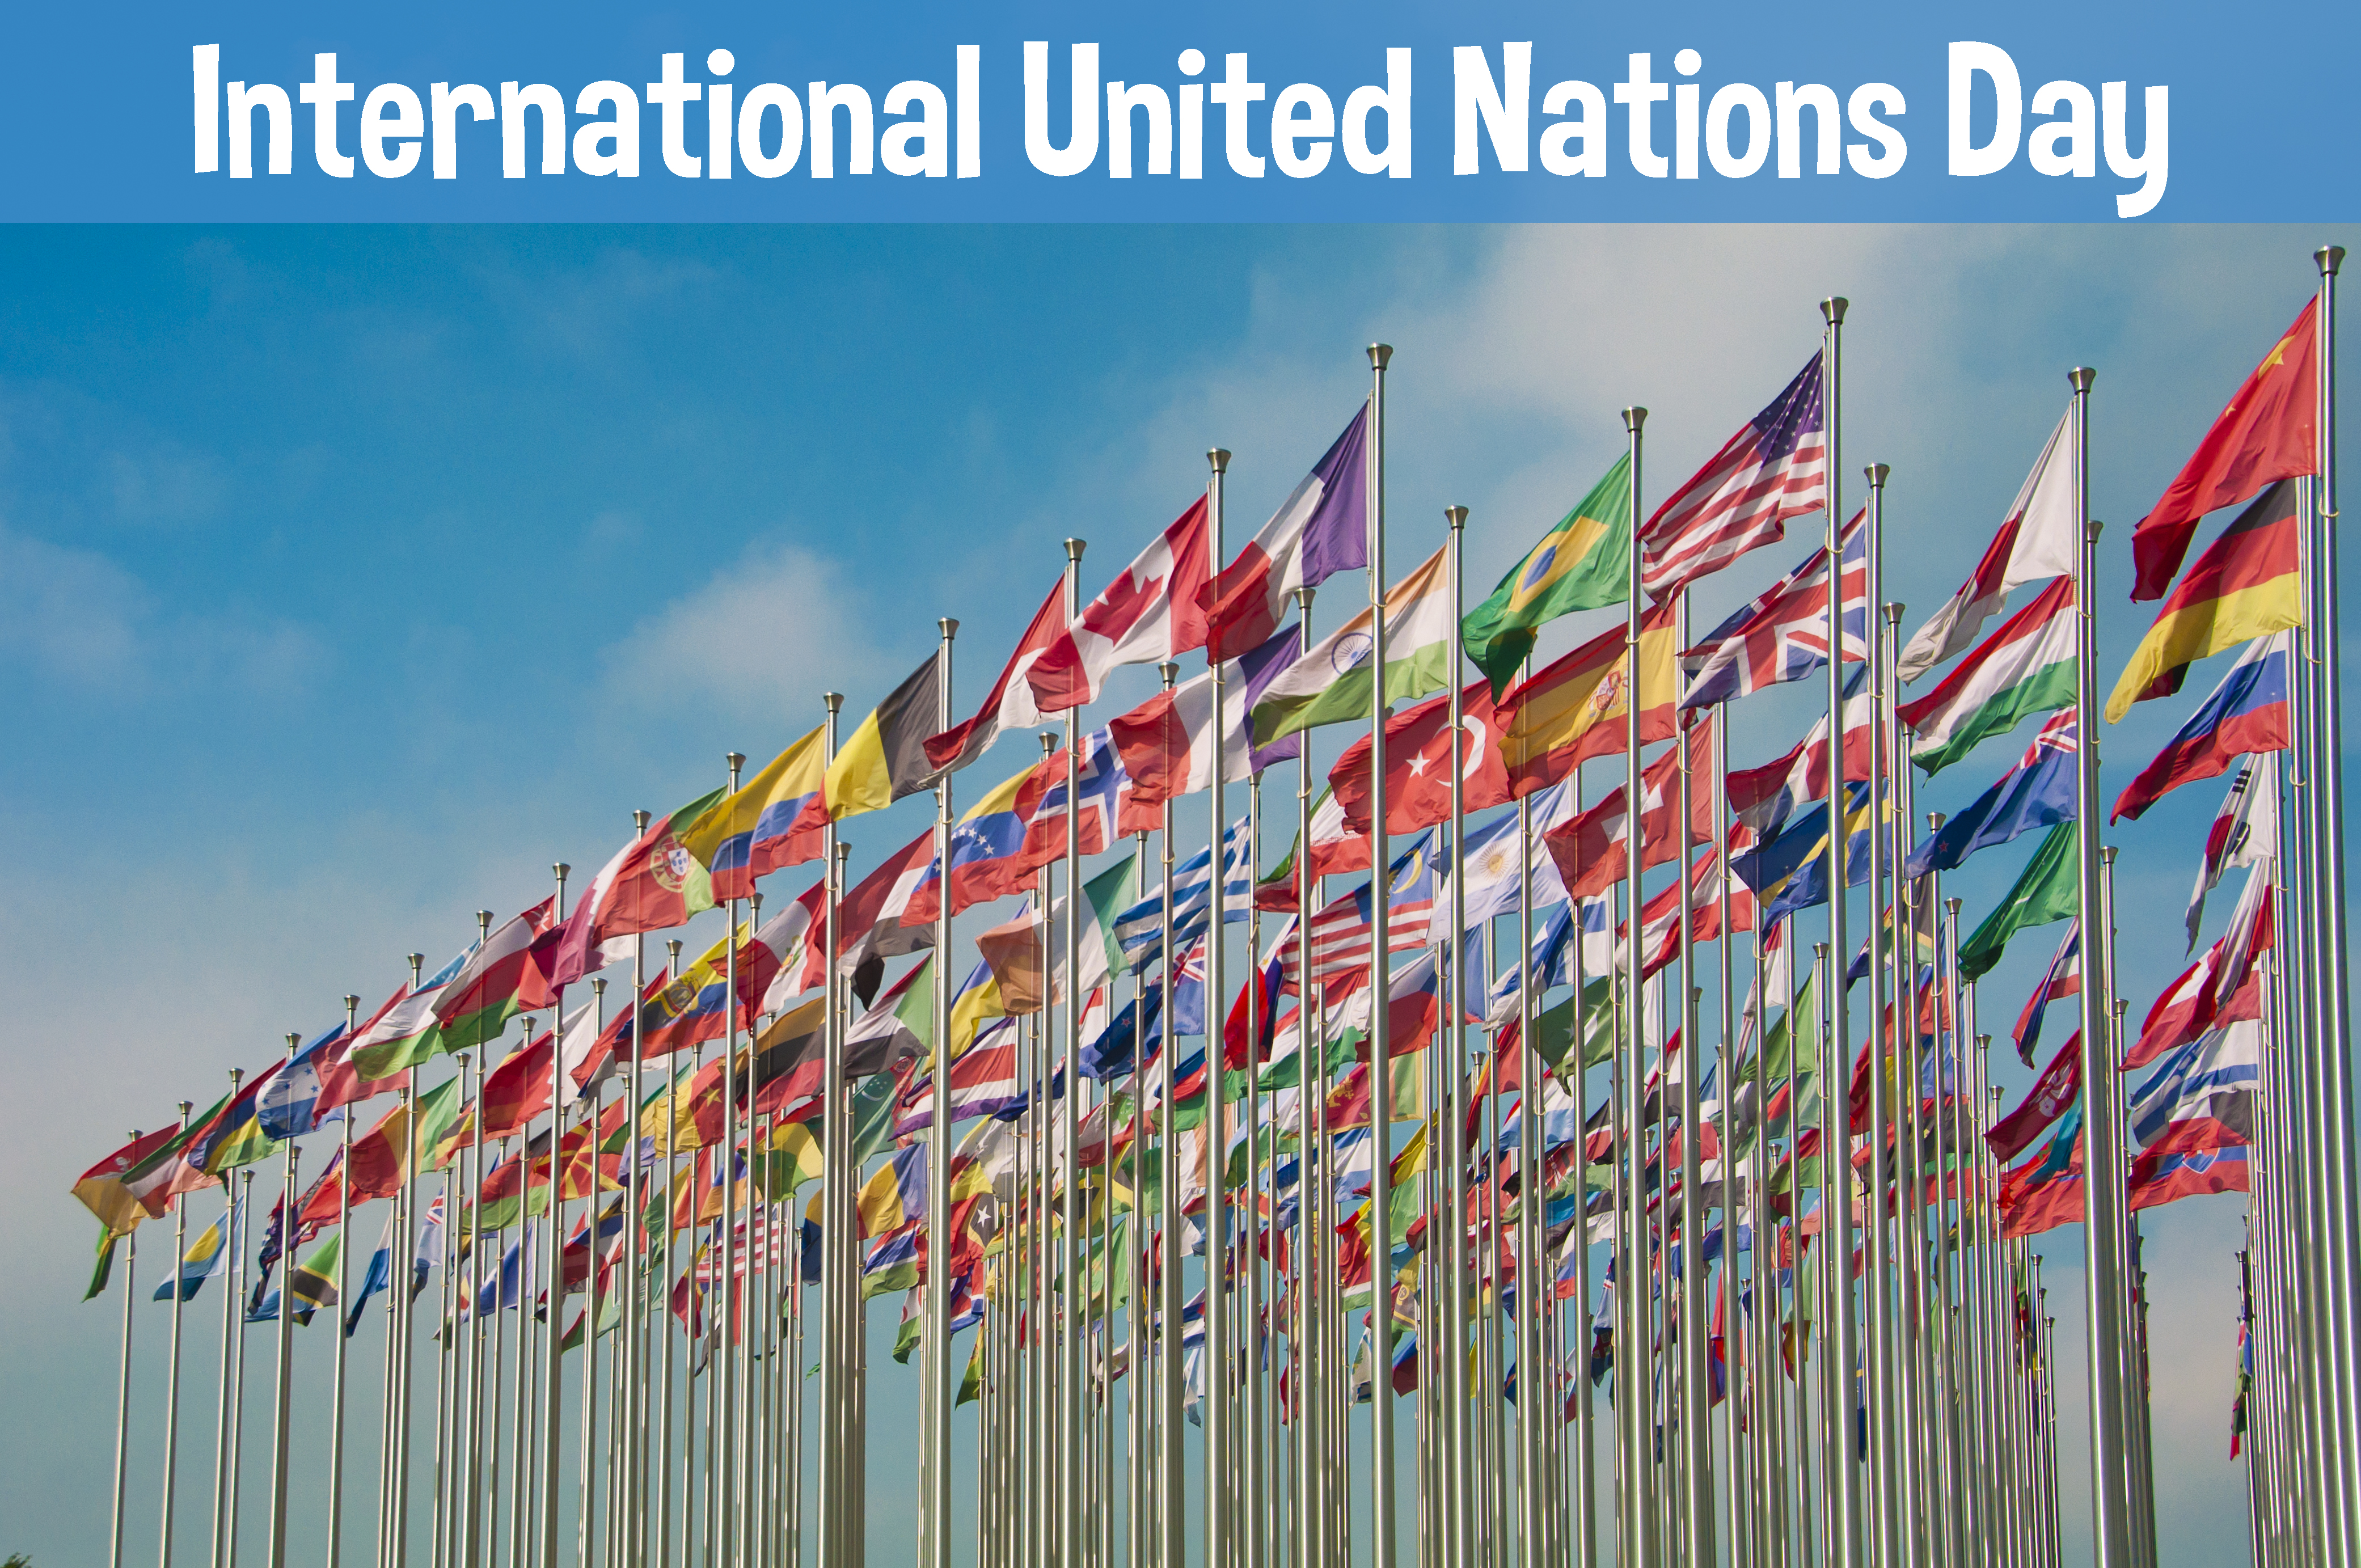 United Nations Day Monday, October 24, 2016